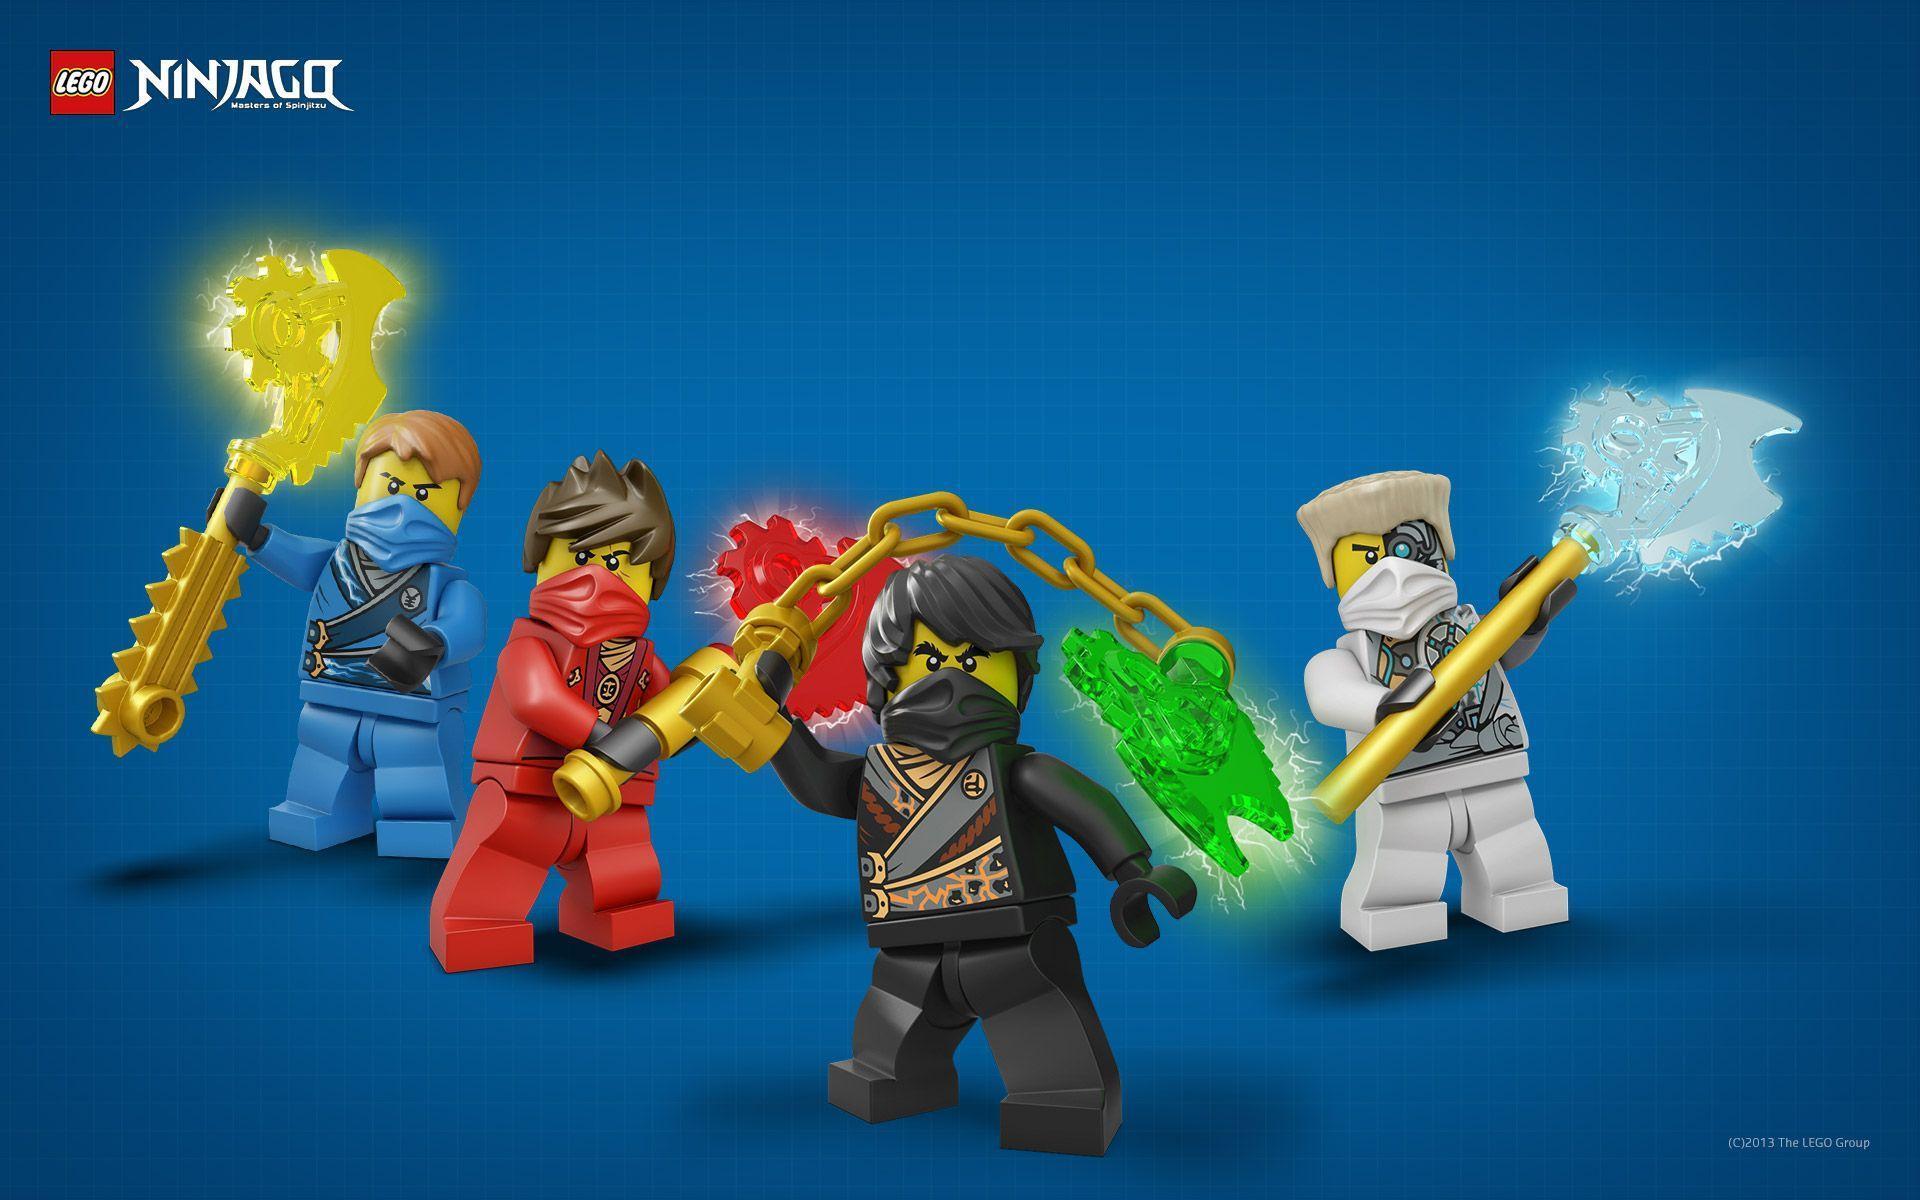 Download and Discuss Awesome New Ninjago Wallpaper